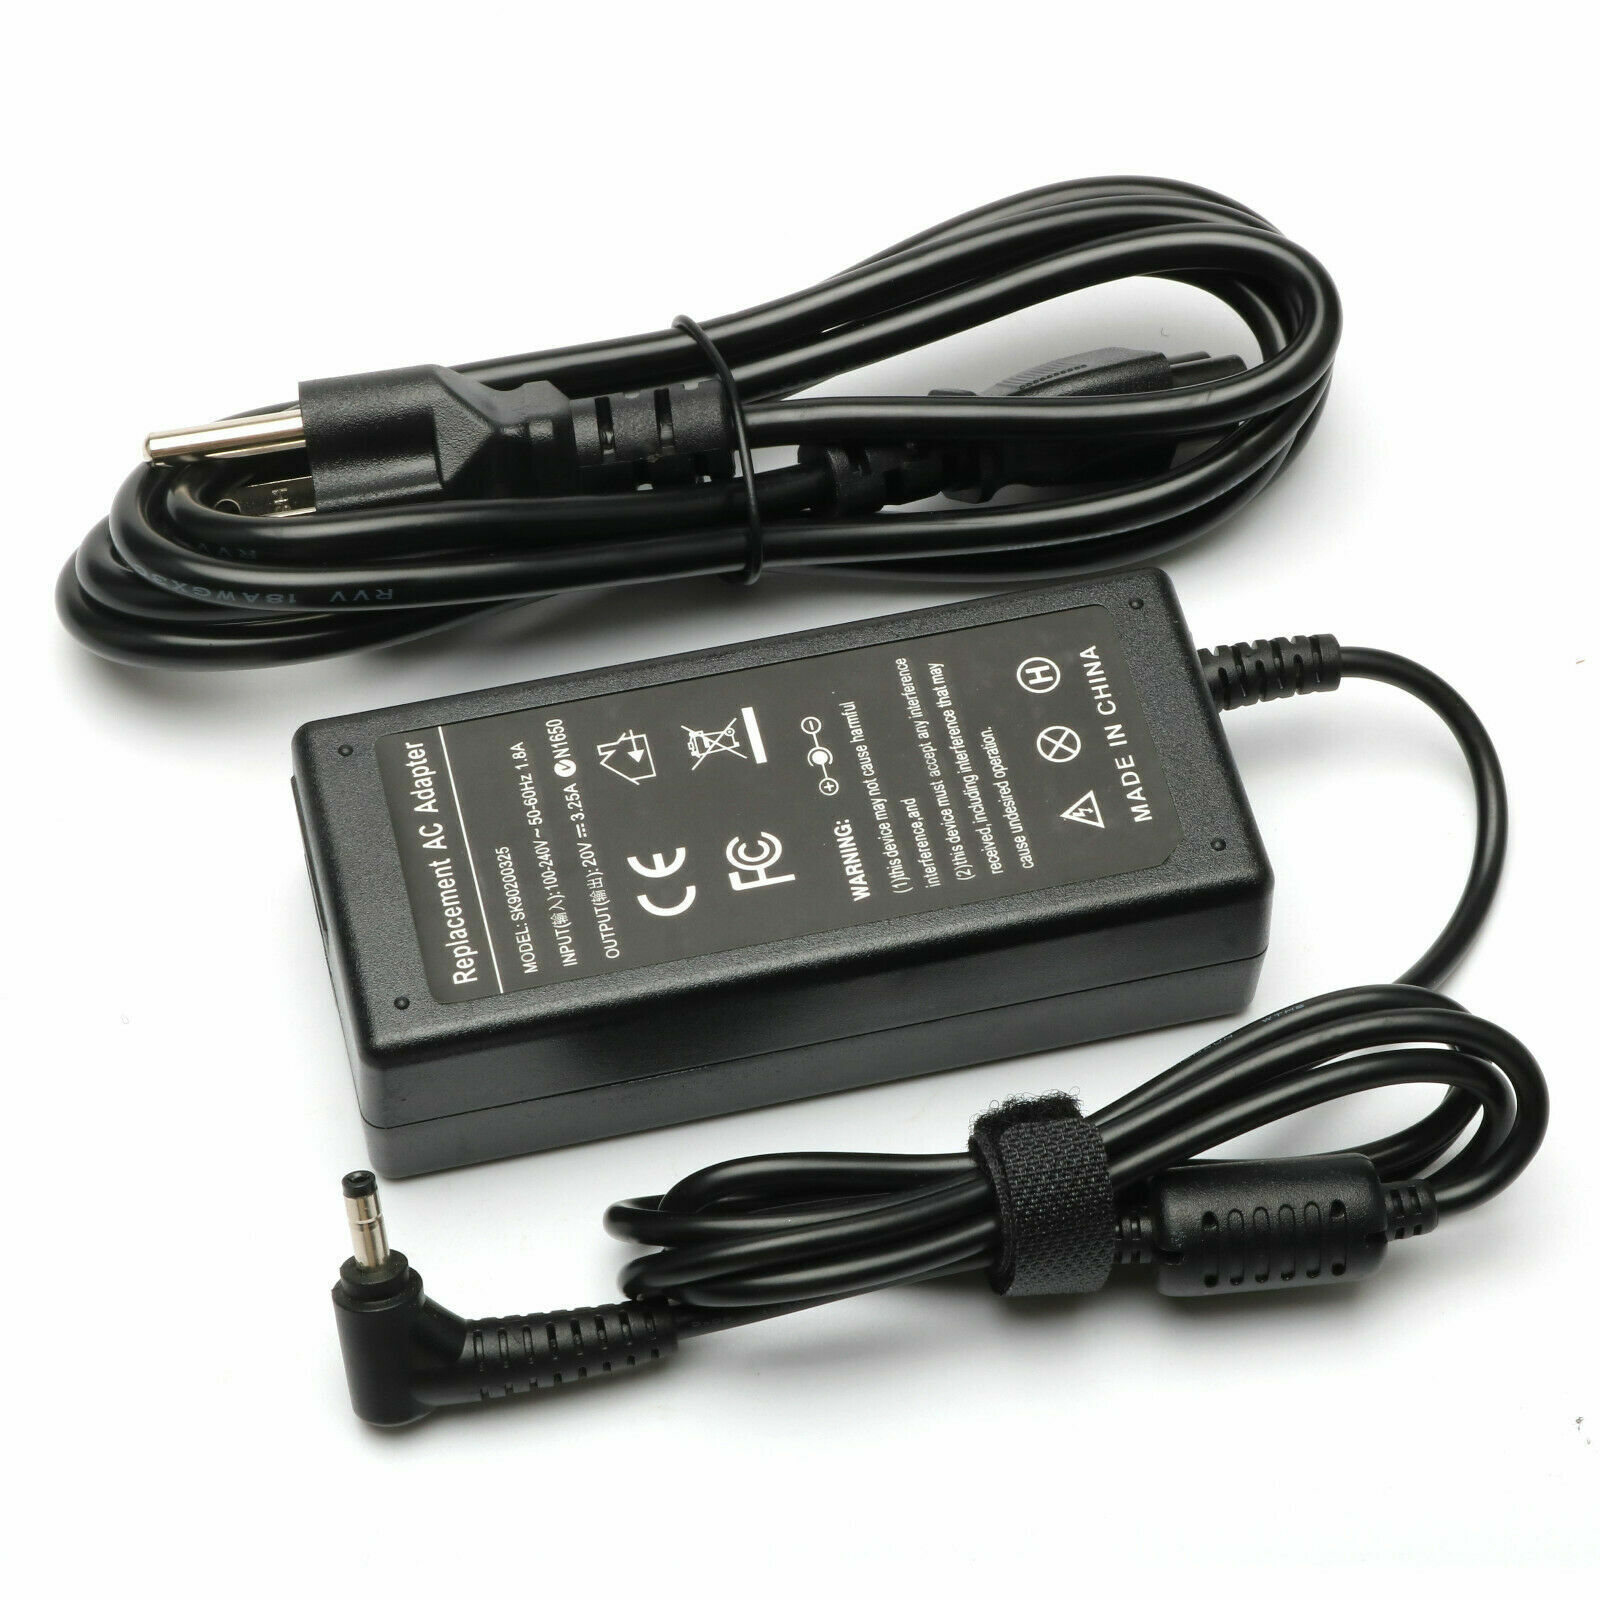 Power Adapter Charger for Lenovo IdeaPad S340 S340-15IWL S340-15IML S340-15IIL